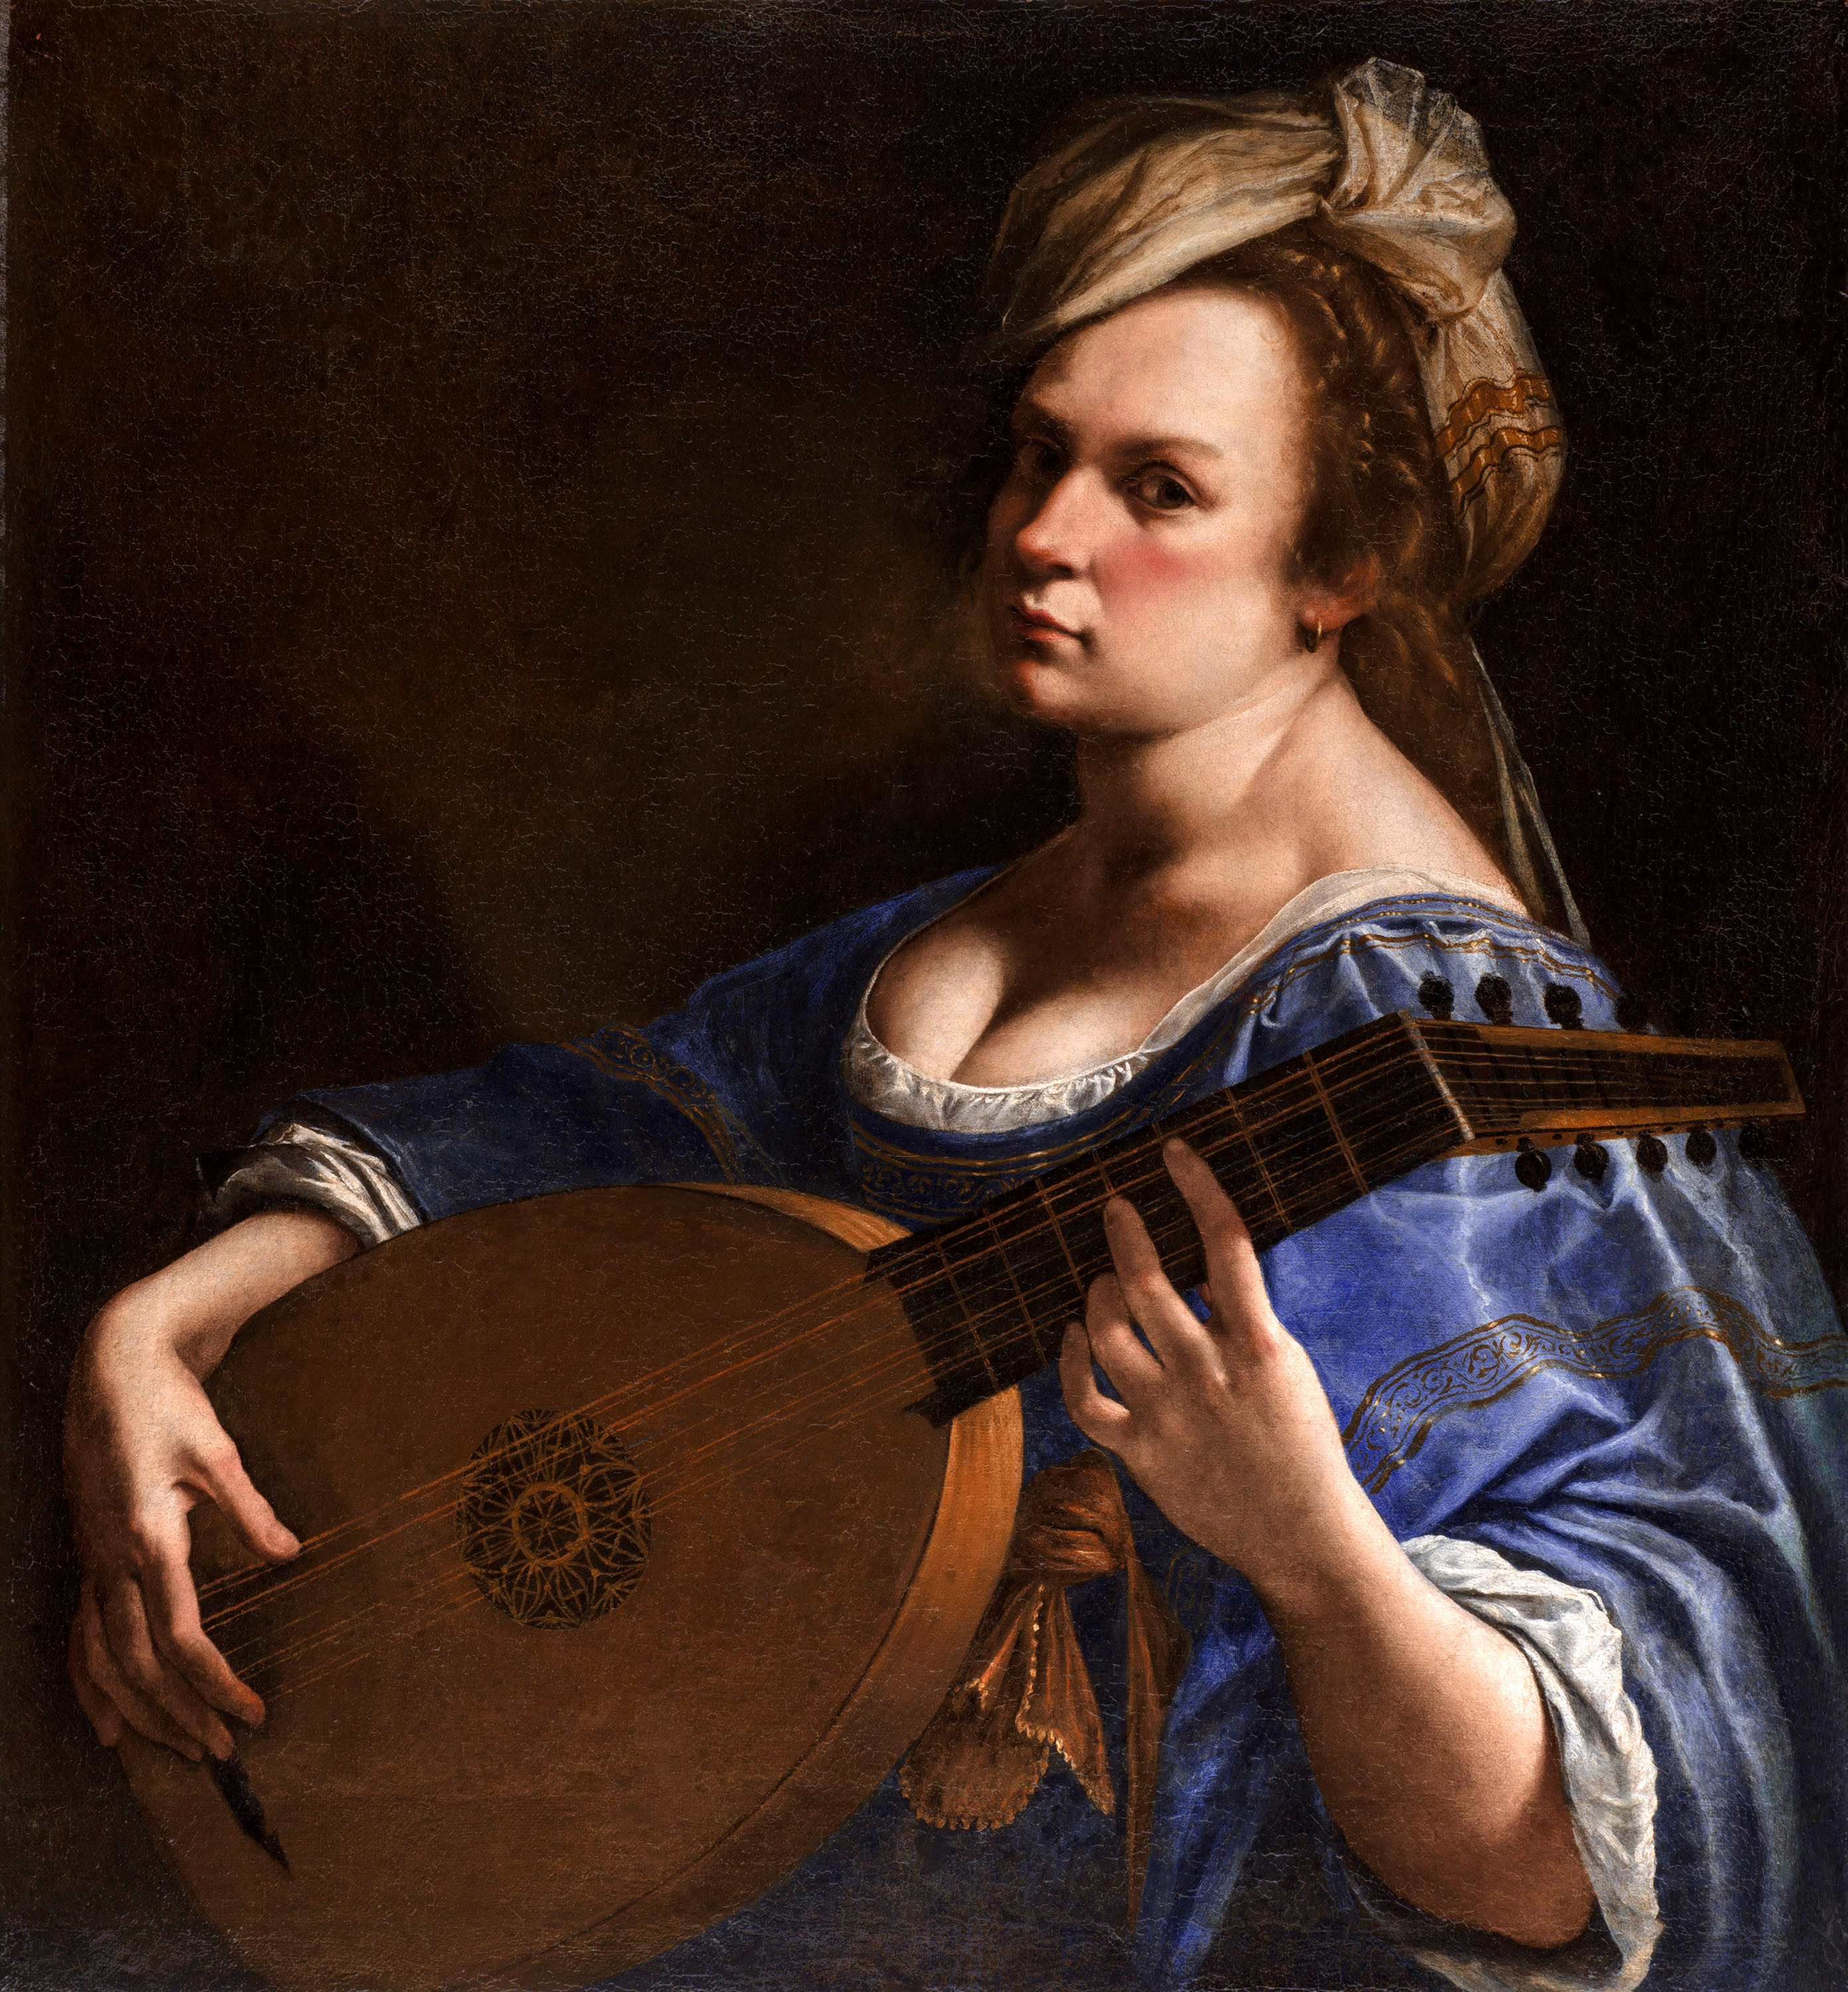 Self-Portrait as a Lute Player by Artemisia Gentileschi - 1610s - 65.5 x 50.2 cm Wadsworth Atheneum Museum of Art